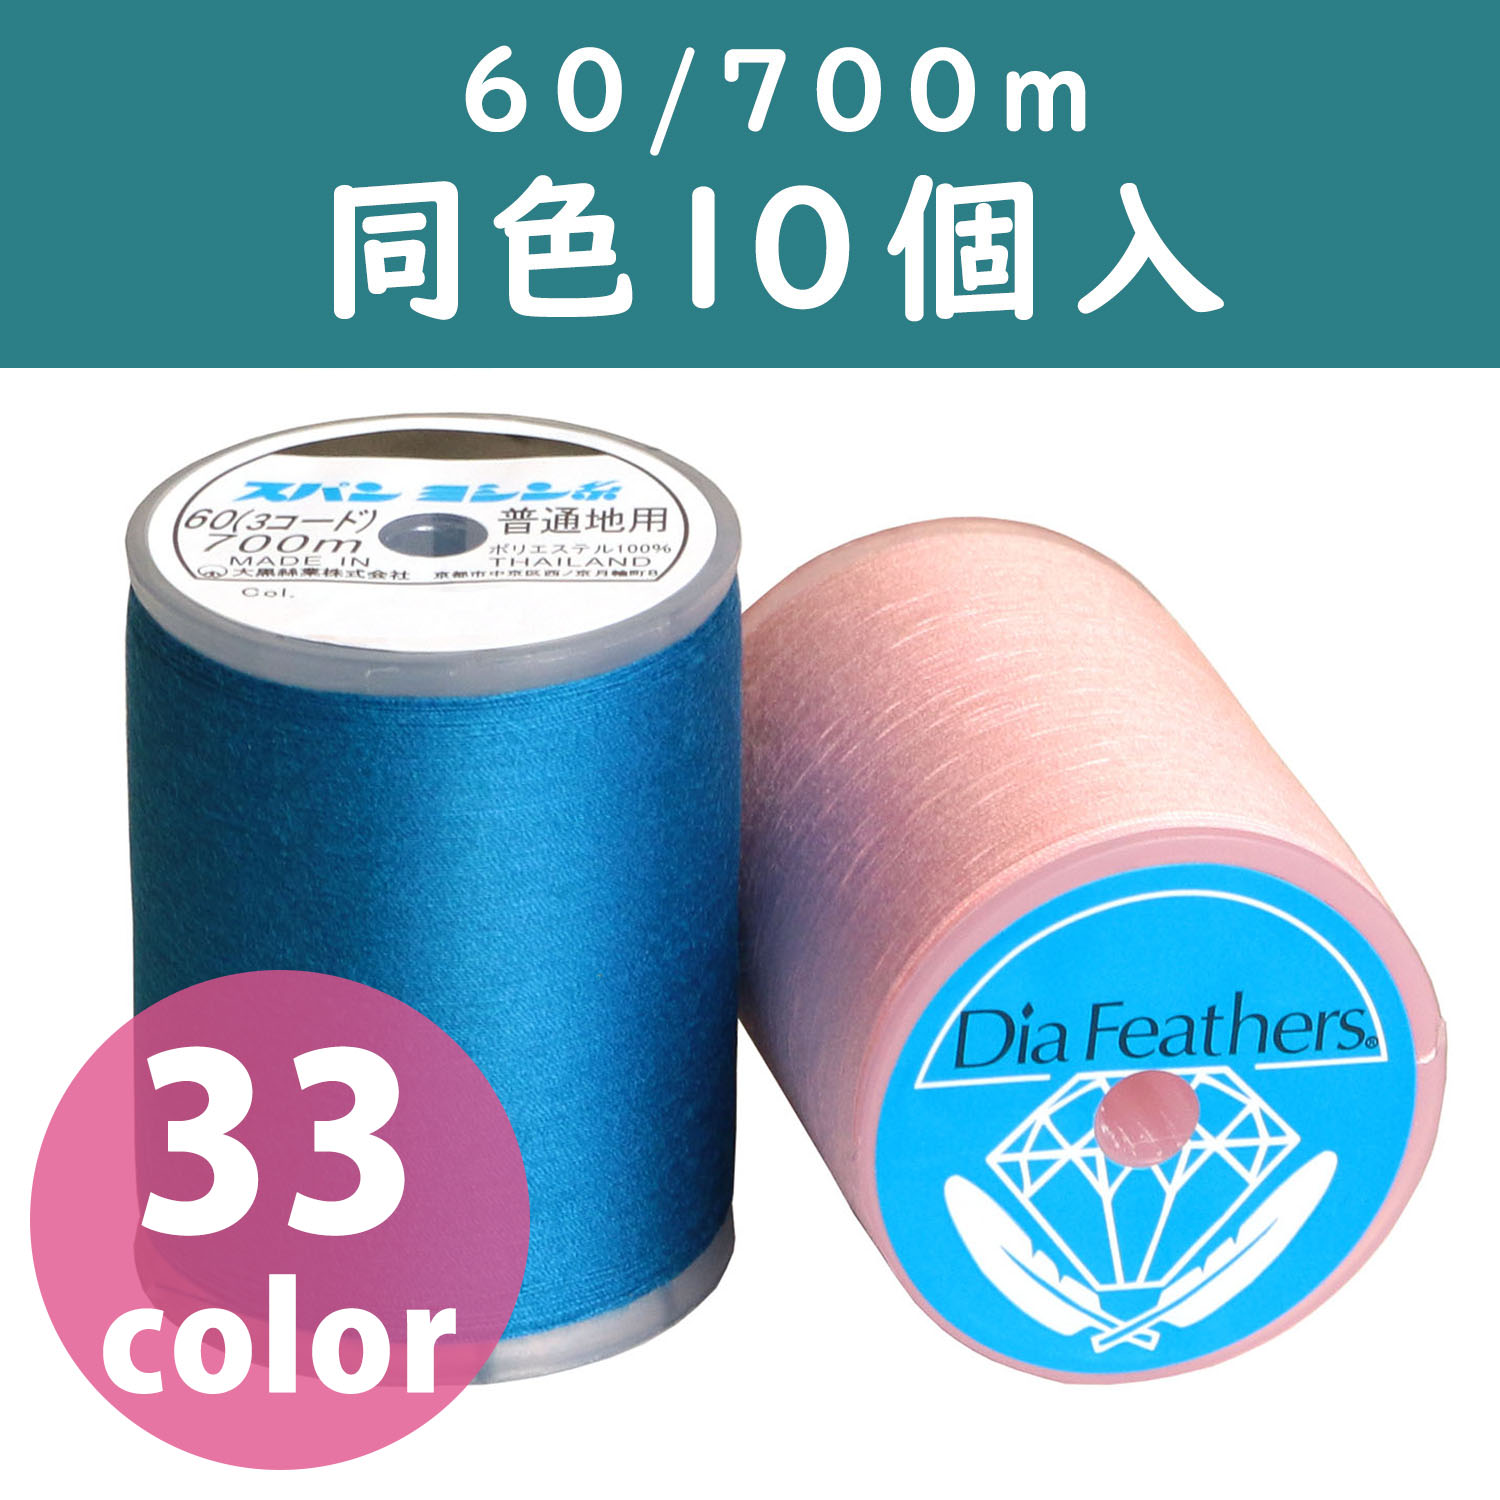 DKS24-10 Household Span Sewing Thread #60/700m ",10 pcs of same color/box (box)